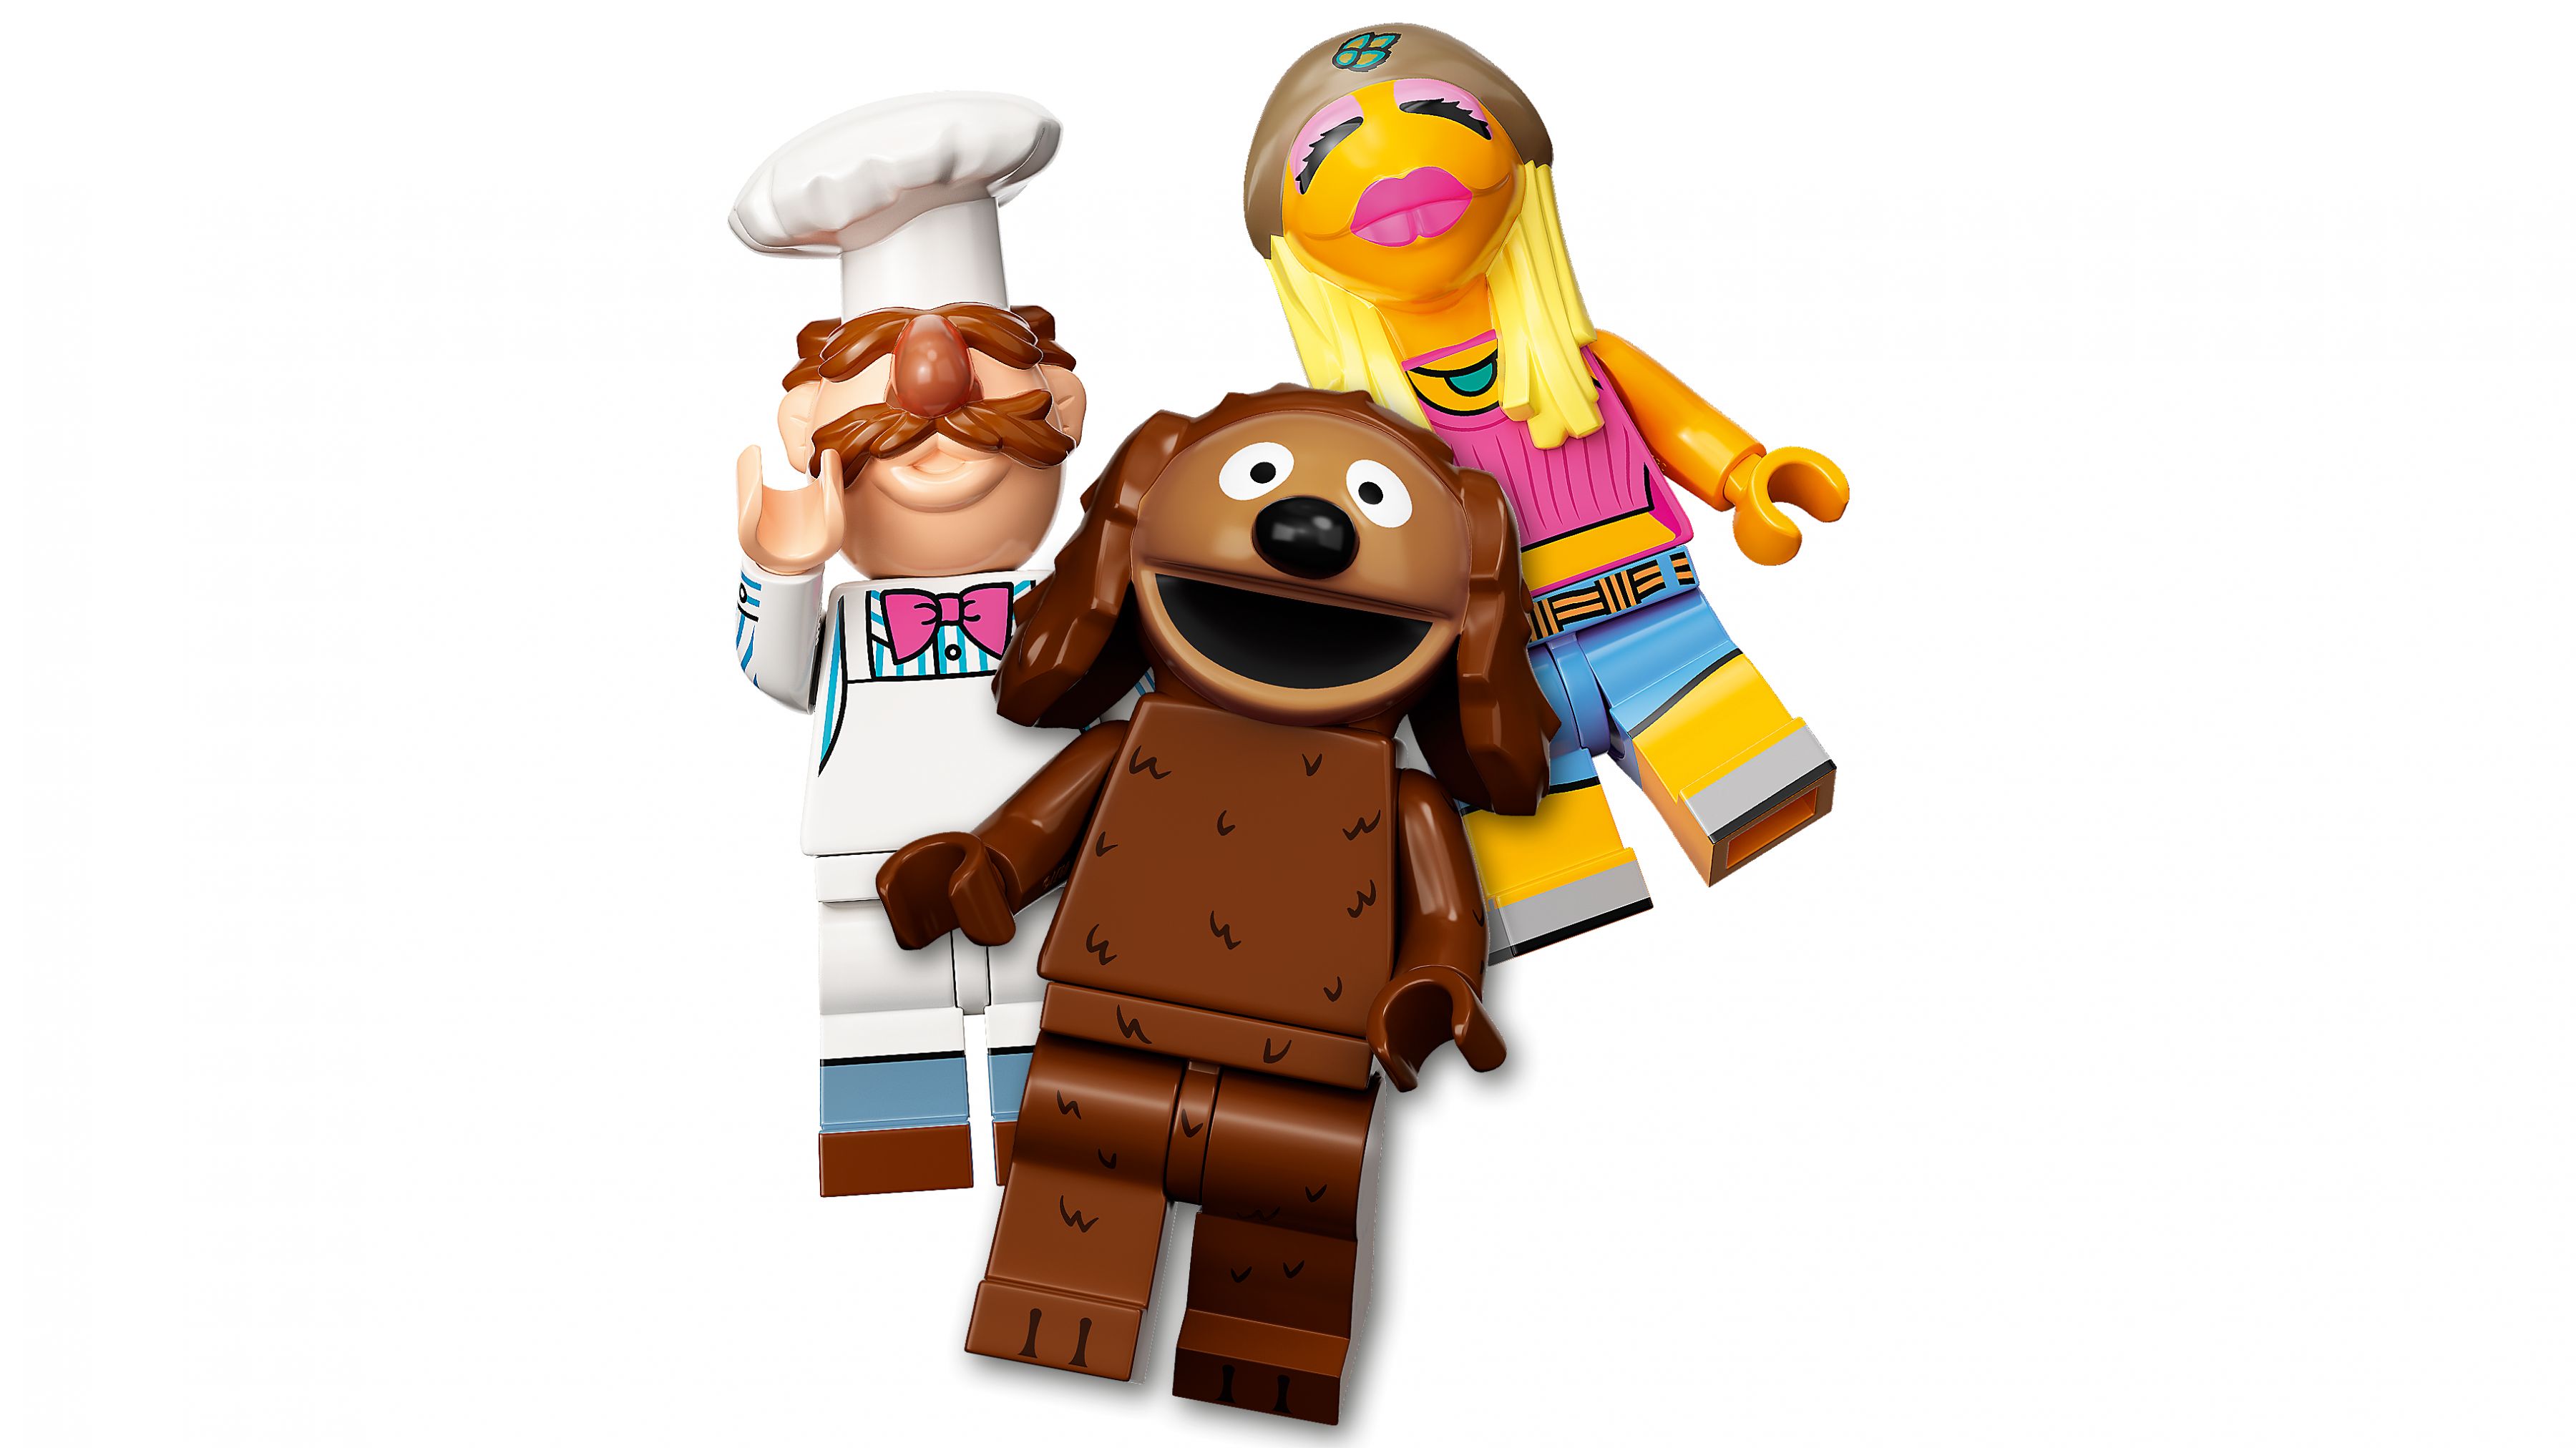 LEGO Collectable Minifigures 71033 Die Muppets LEGO_71033_71035_WEB_SEC02_NOBG.jpg